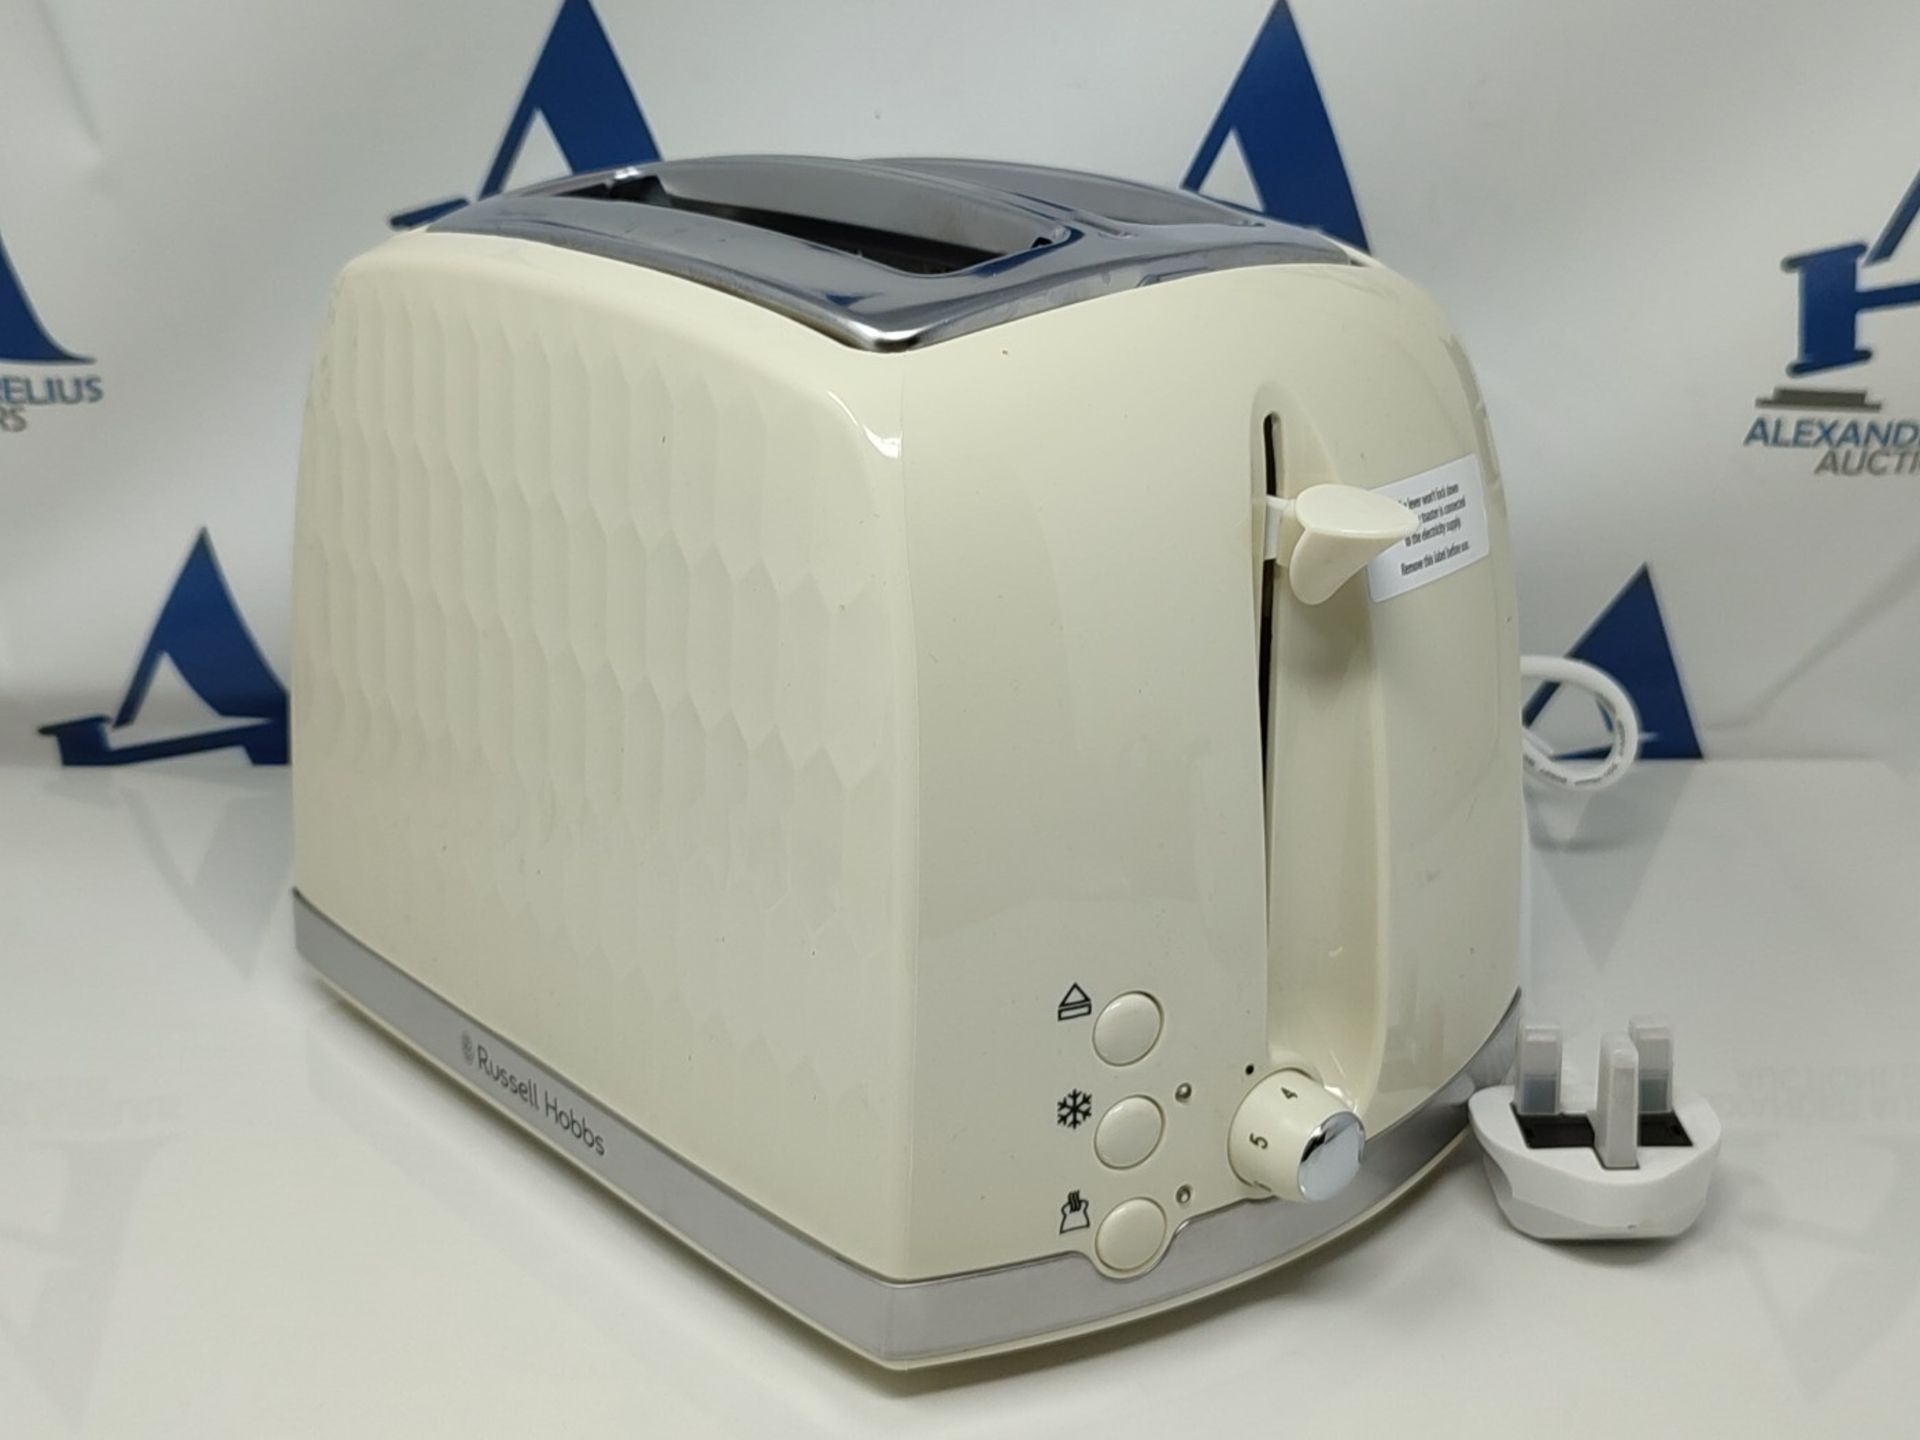 Russell Hobbs 26062 2 Slice Toaster - Contemporary Honeycomb Design with Extra Wide Sl - Image 2 of 3